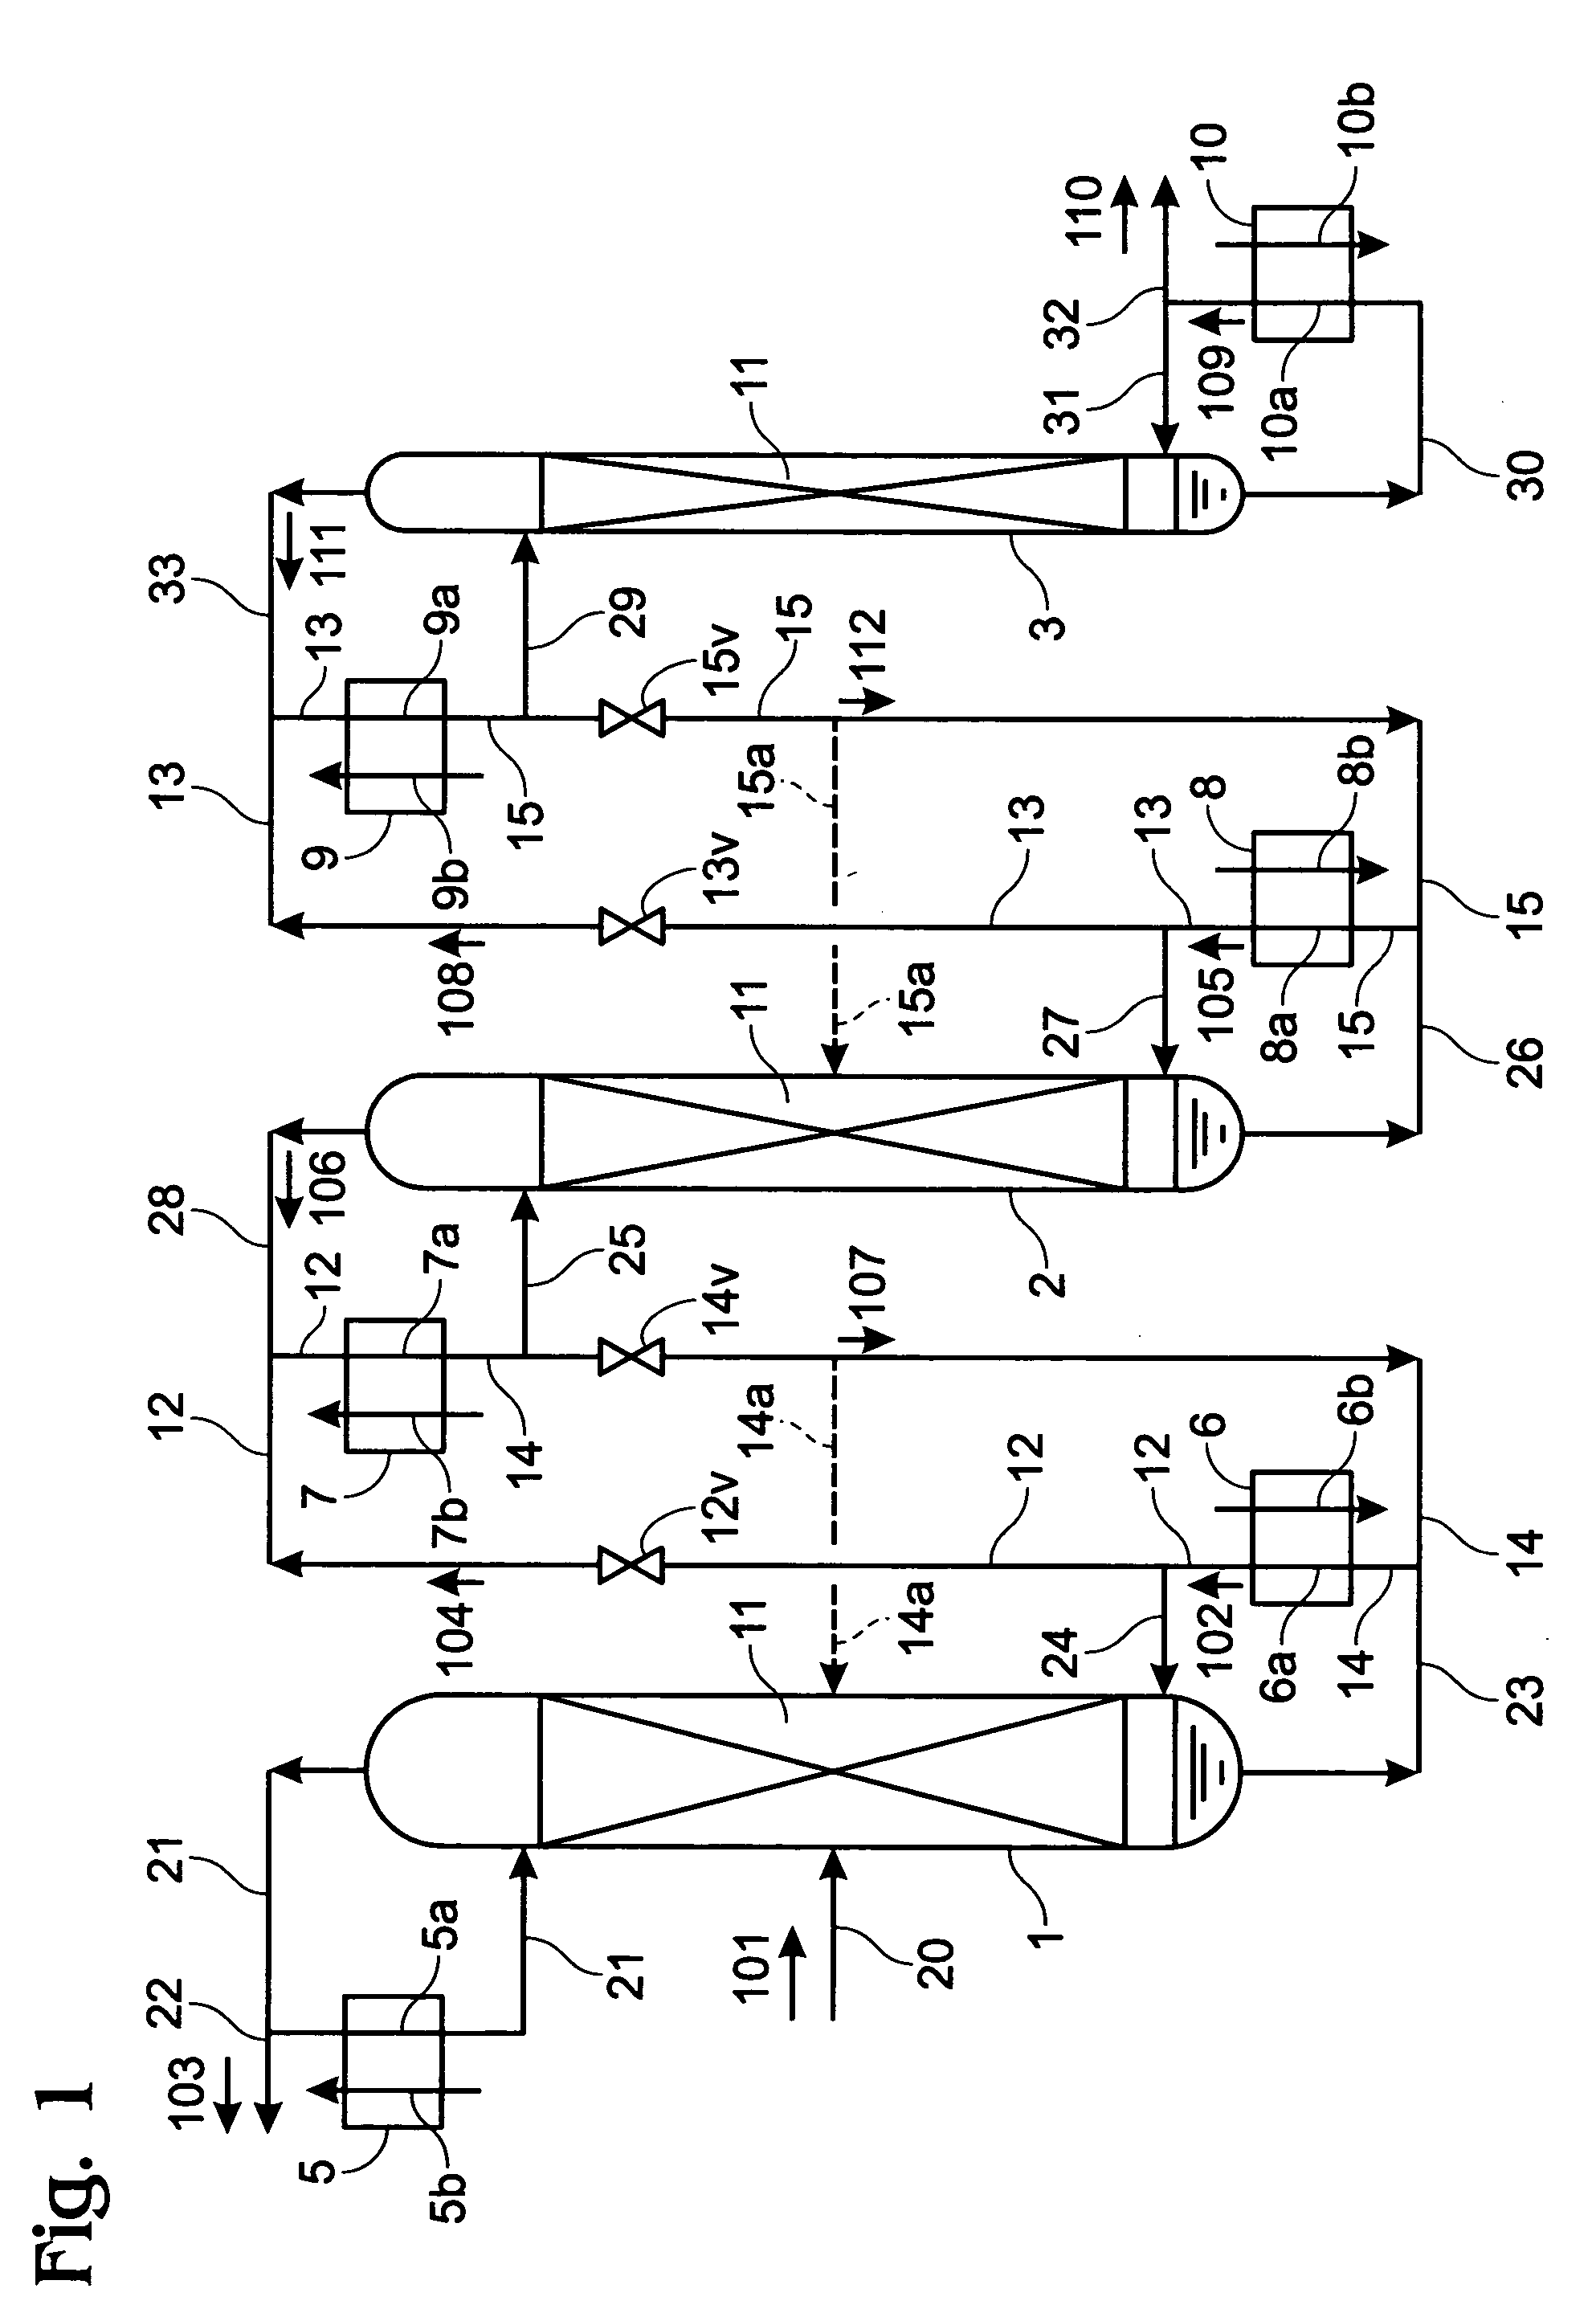 Apparatus, method for enrichment of the heavy isotopes of oxygen and production method for heavy oxygen water